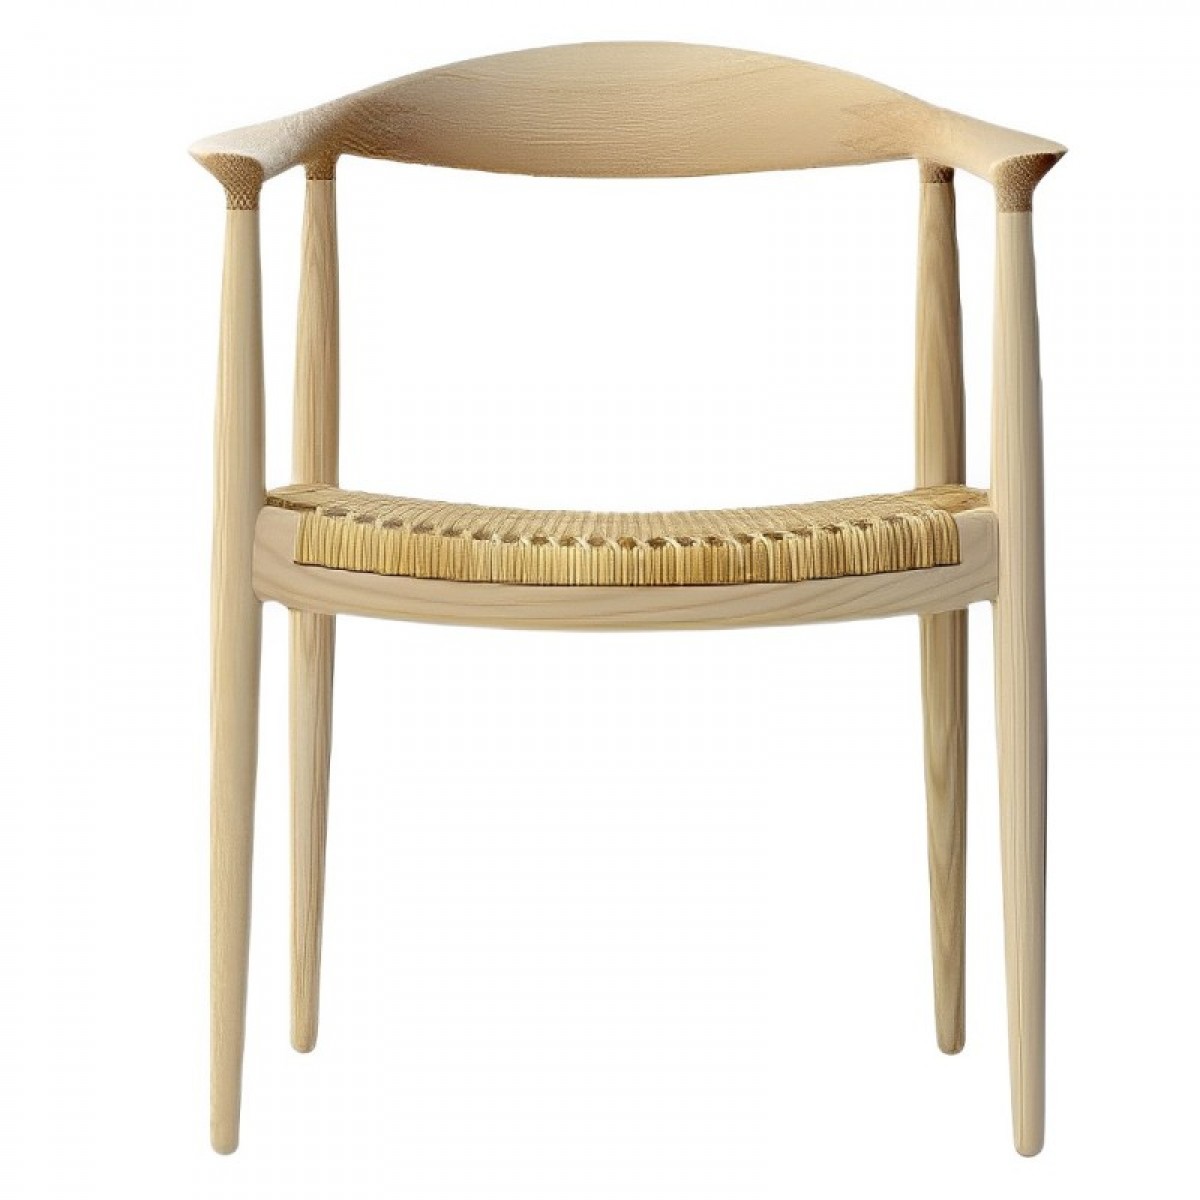 pp501 Round Chair / The Chair